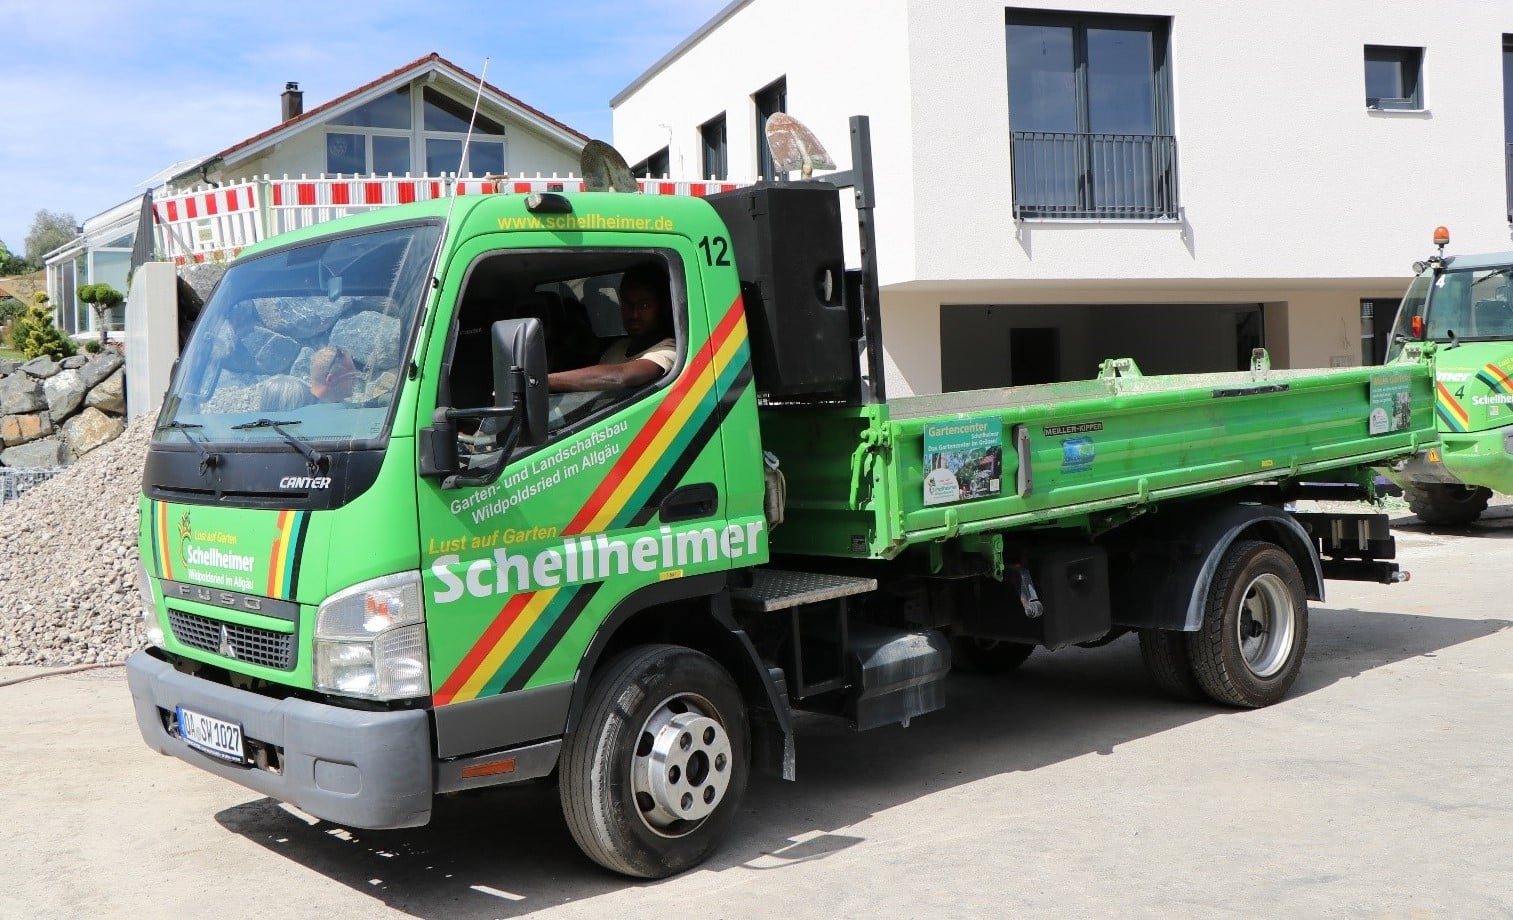 GREEN THUMBS UP. THE FUSO CANTER CONVINCES THE LANDSCAPING PROFESSIONALS AT SCHELLHEIMER GMBH.